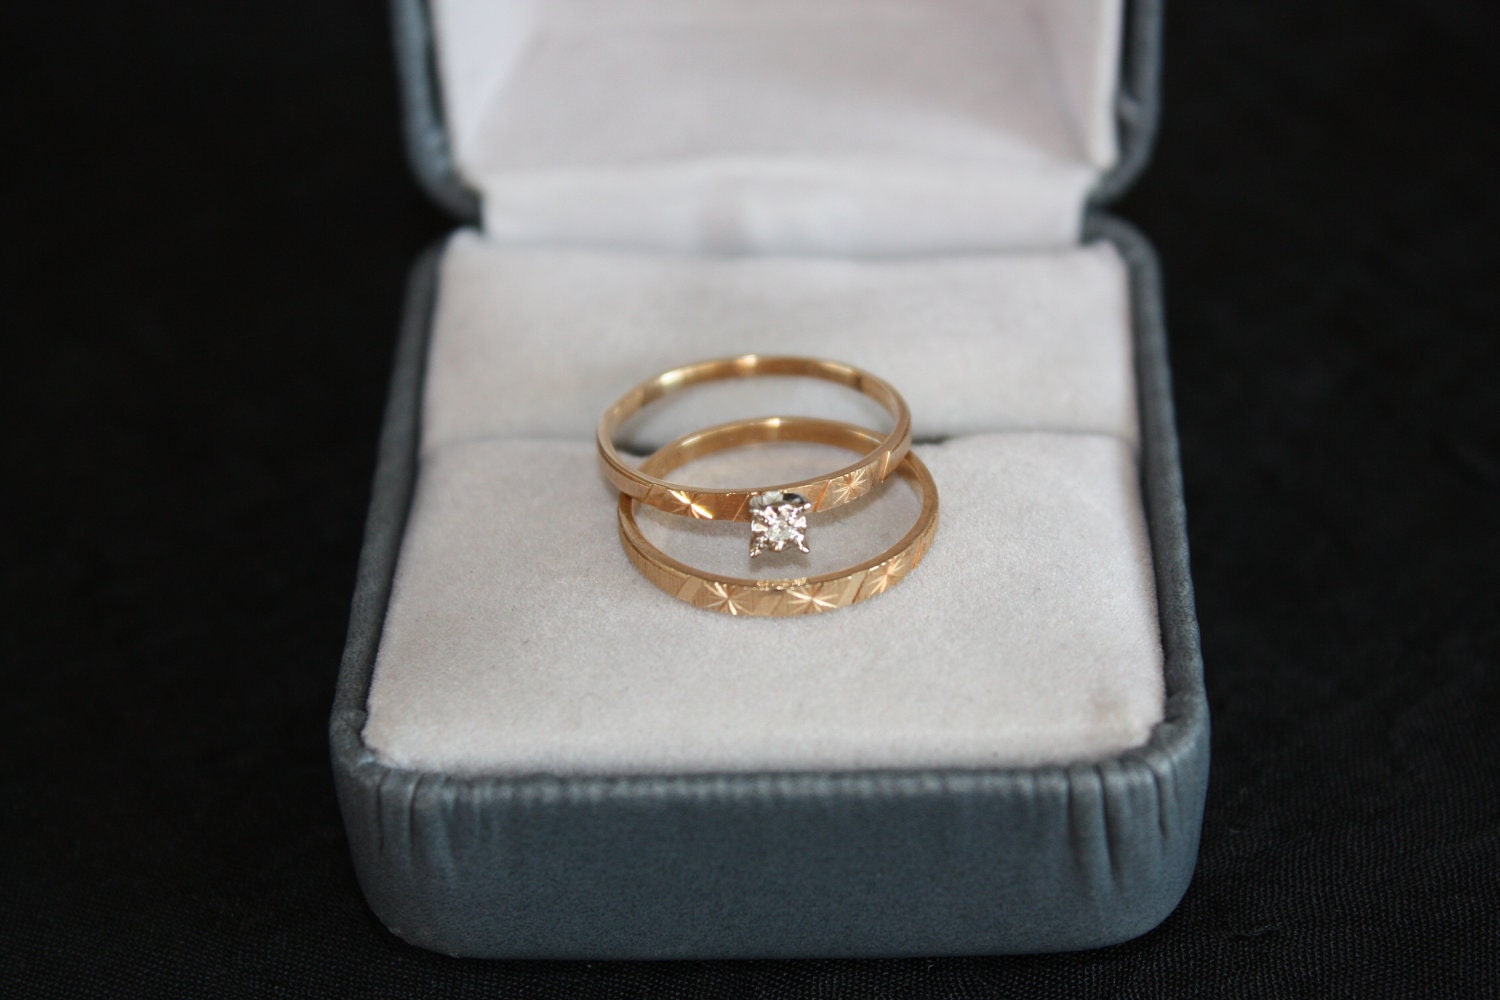 Vintage Wedding Ring Set 10K Yellow Gold & by DansFineJewelry